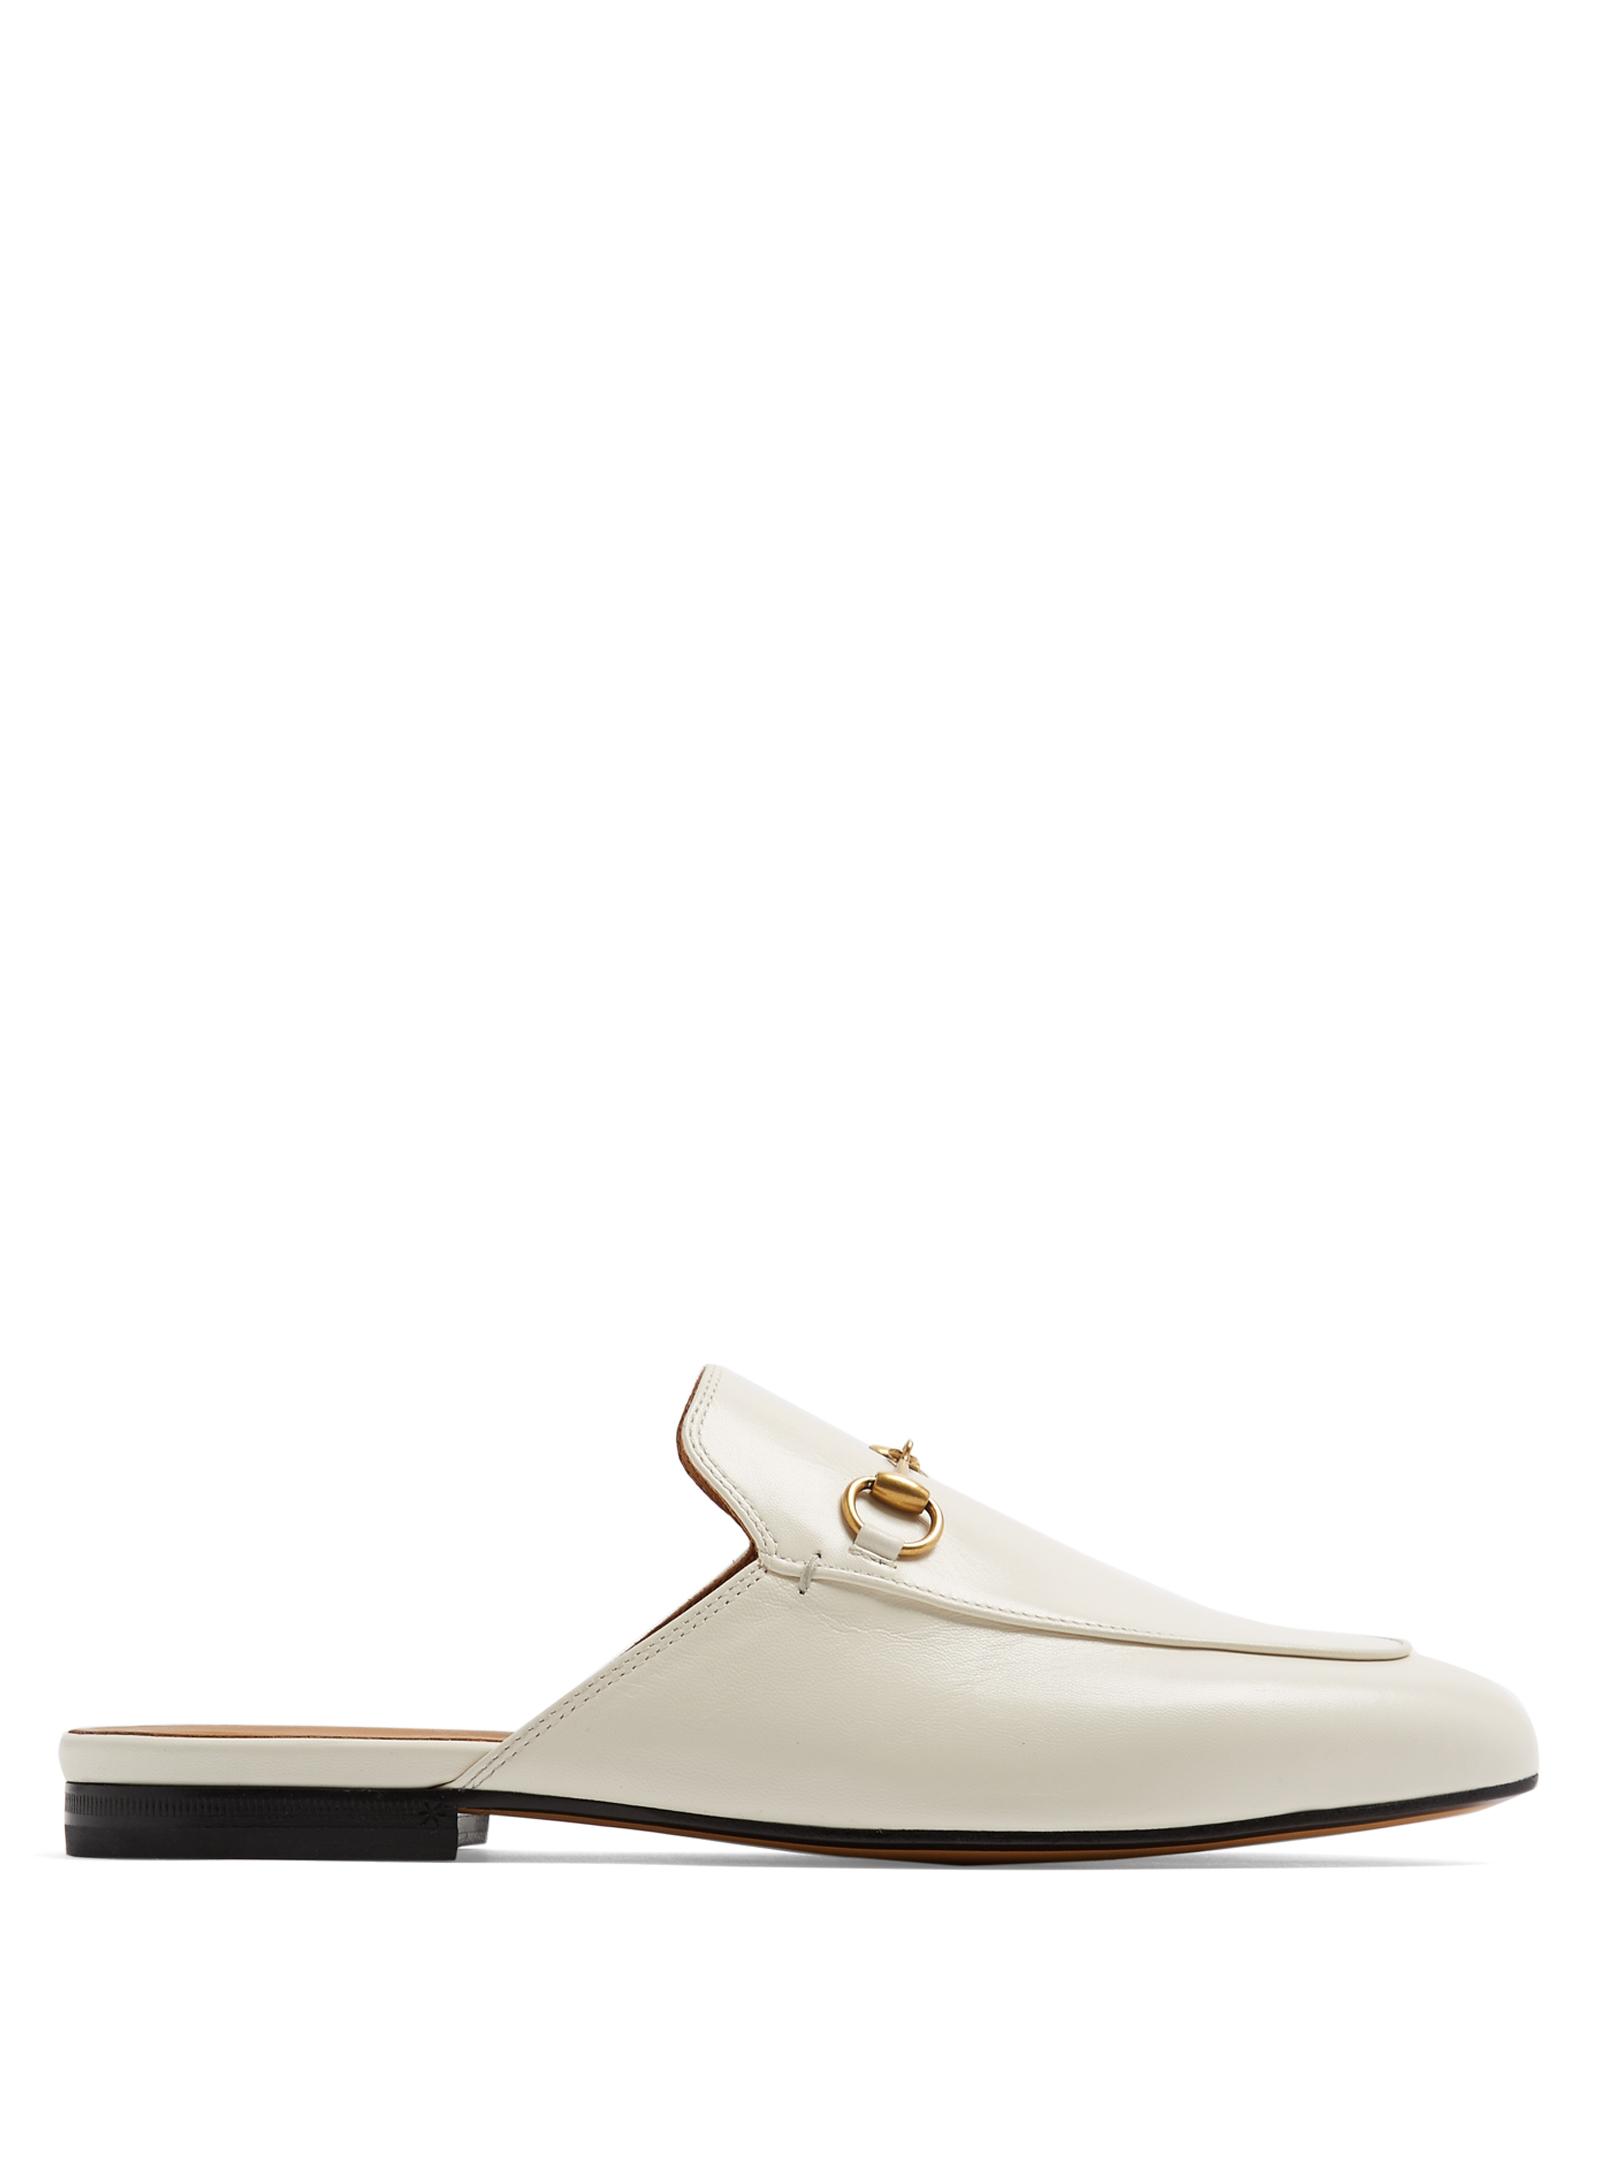 Lyst - Gucci Princetown Leather Backless Loafers in White - Save 5%